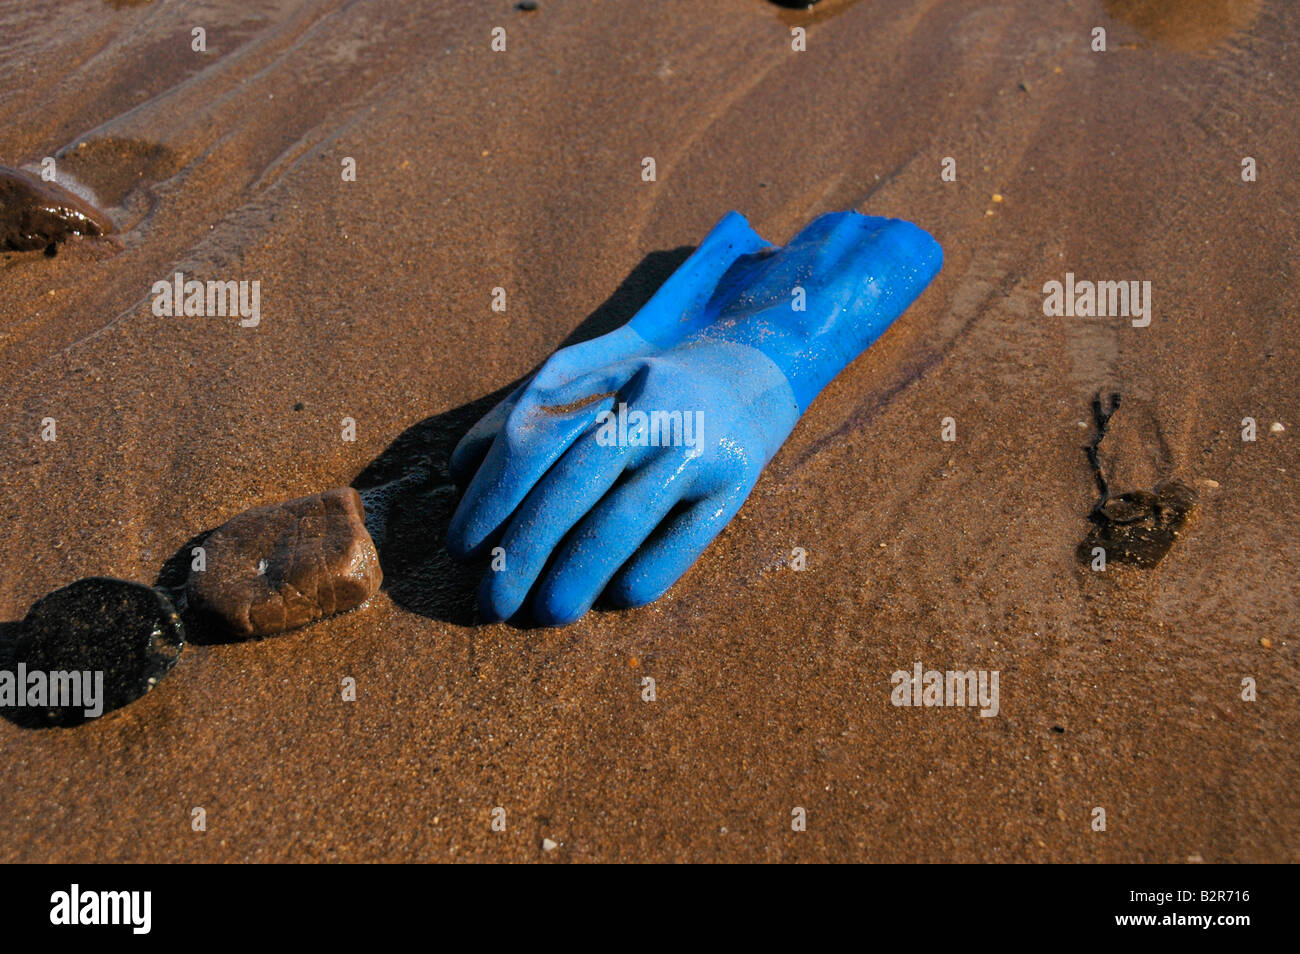 A blue rubber glove washed up onto  the beach. Stock Photo